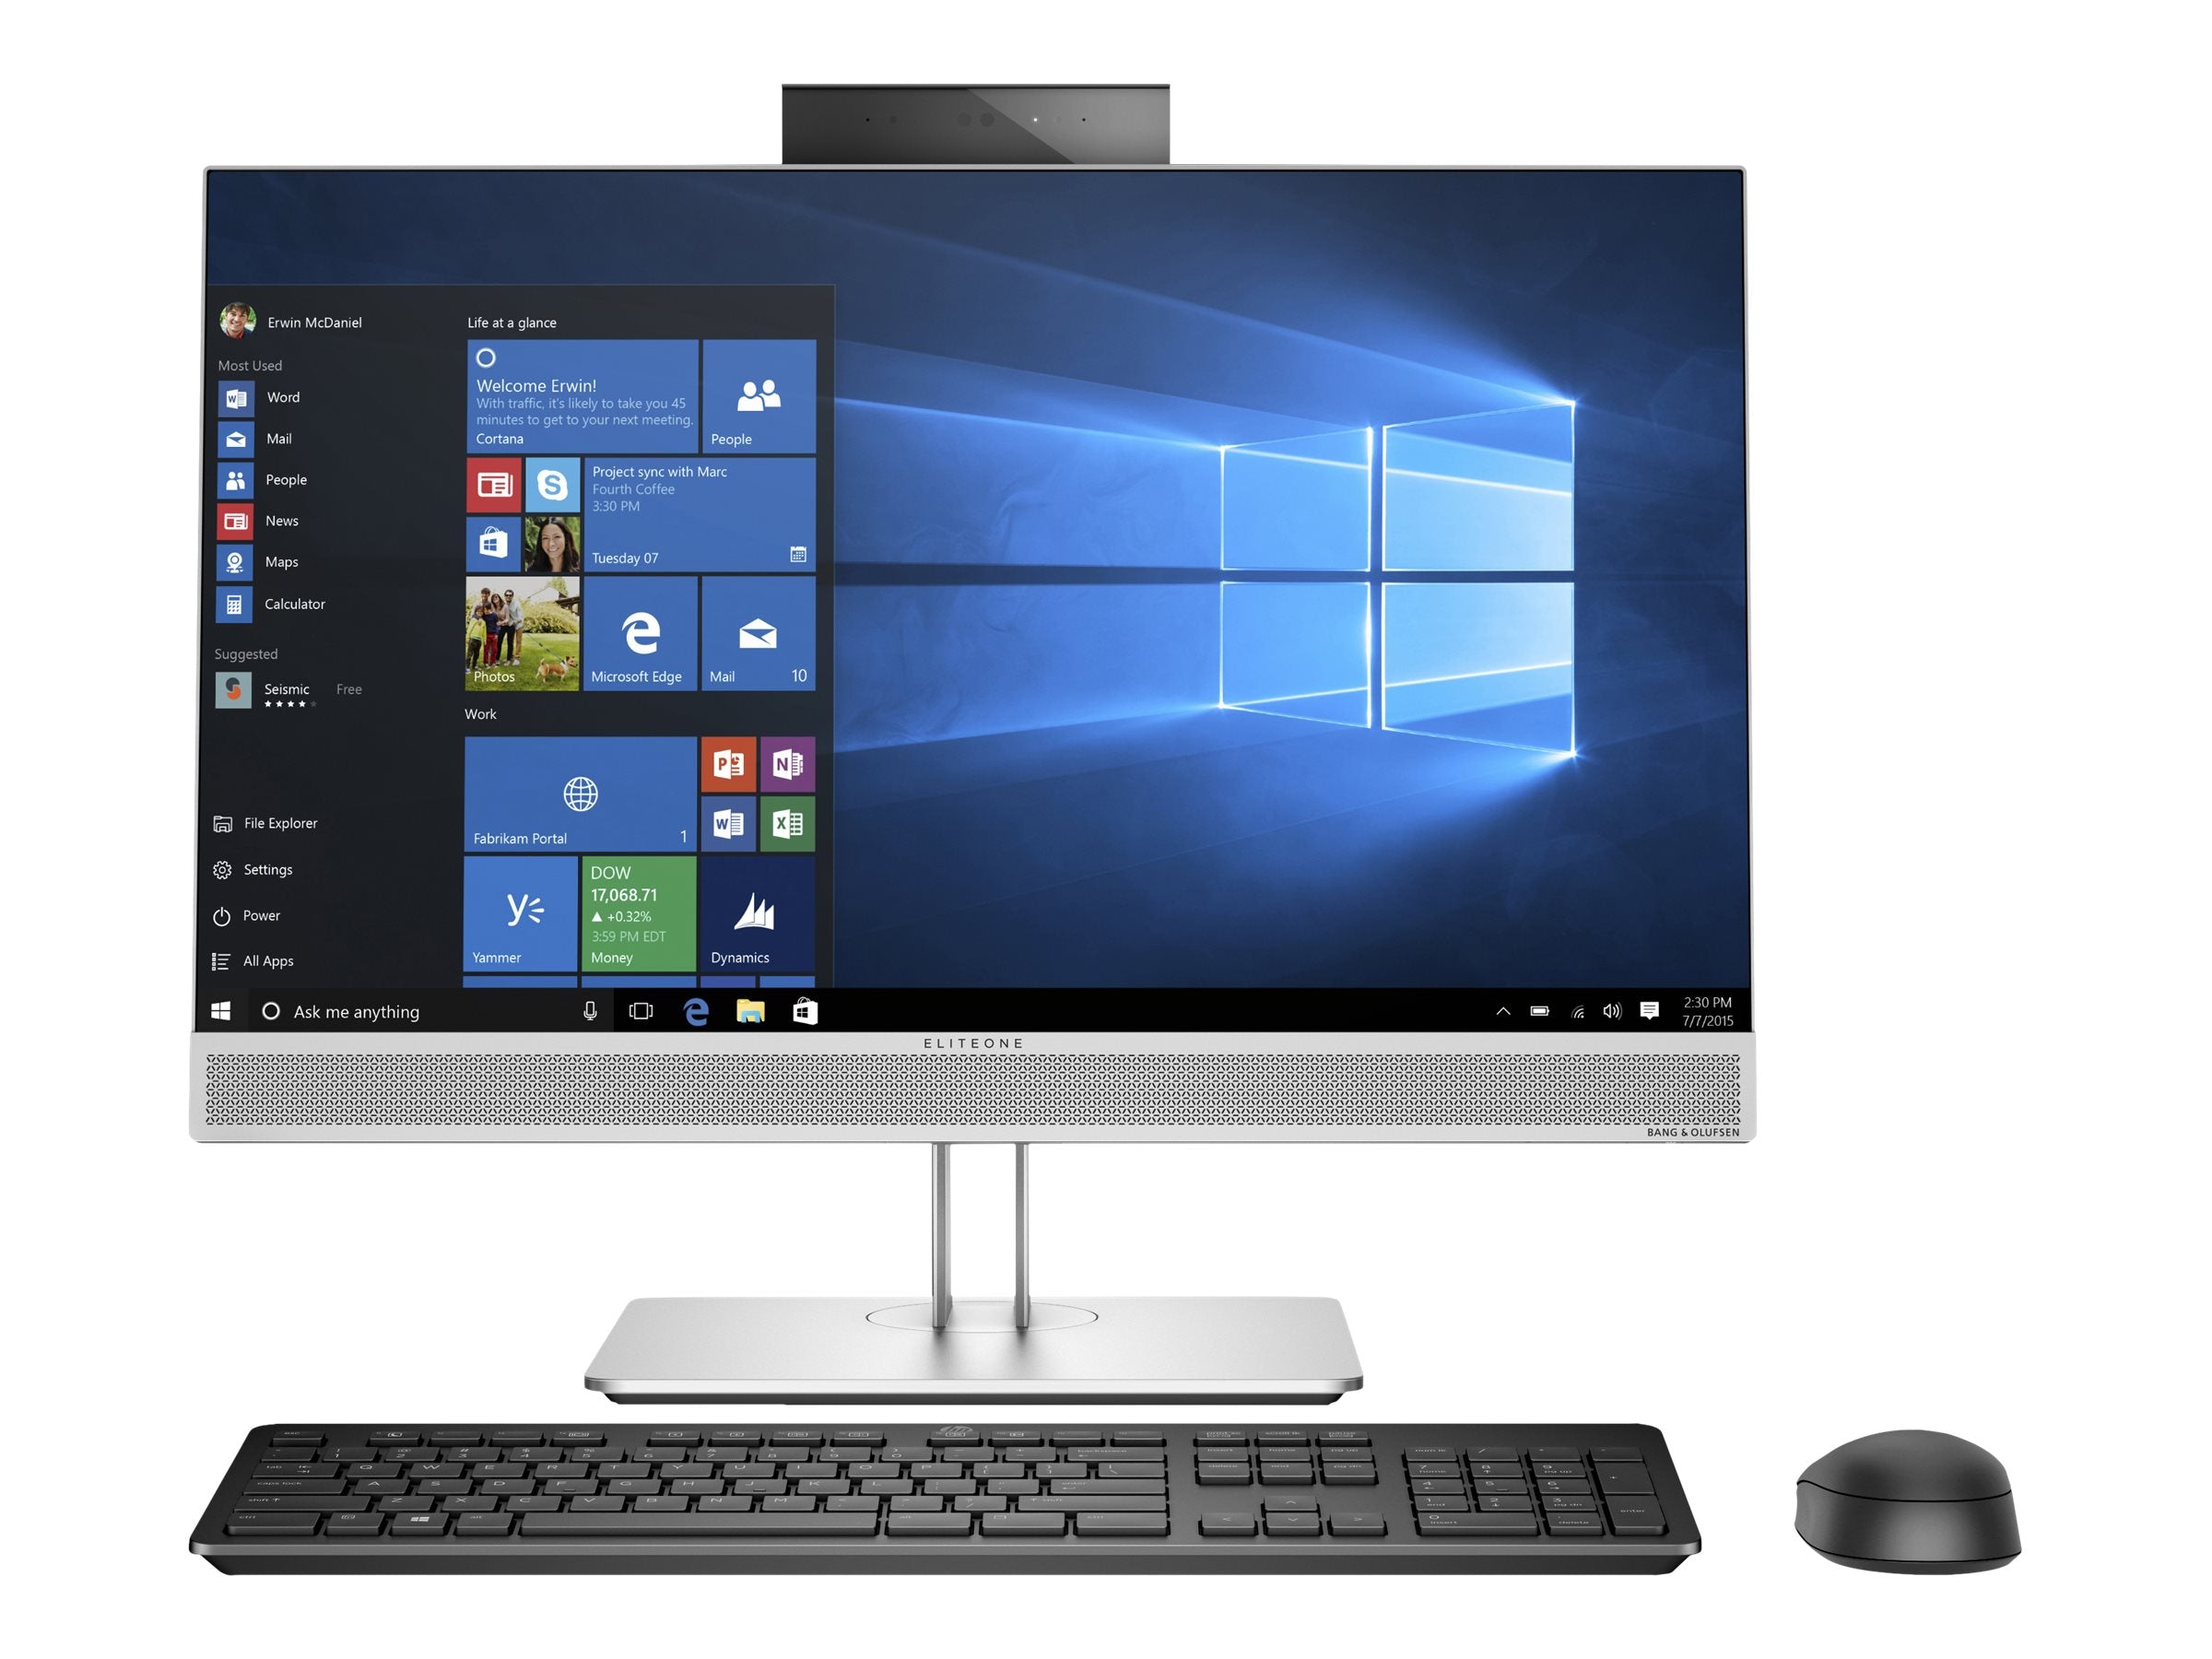 HP EliteDesk 800 G4 23.8-inch NonTouch All-in-One PC - I5-8500 8GB 1TB